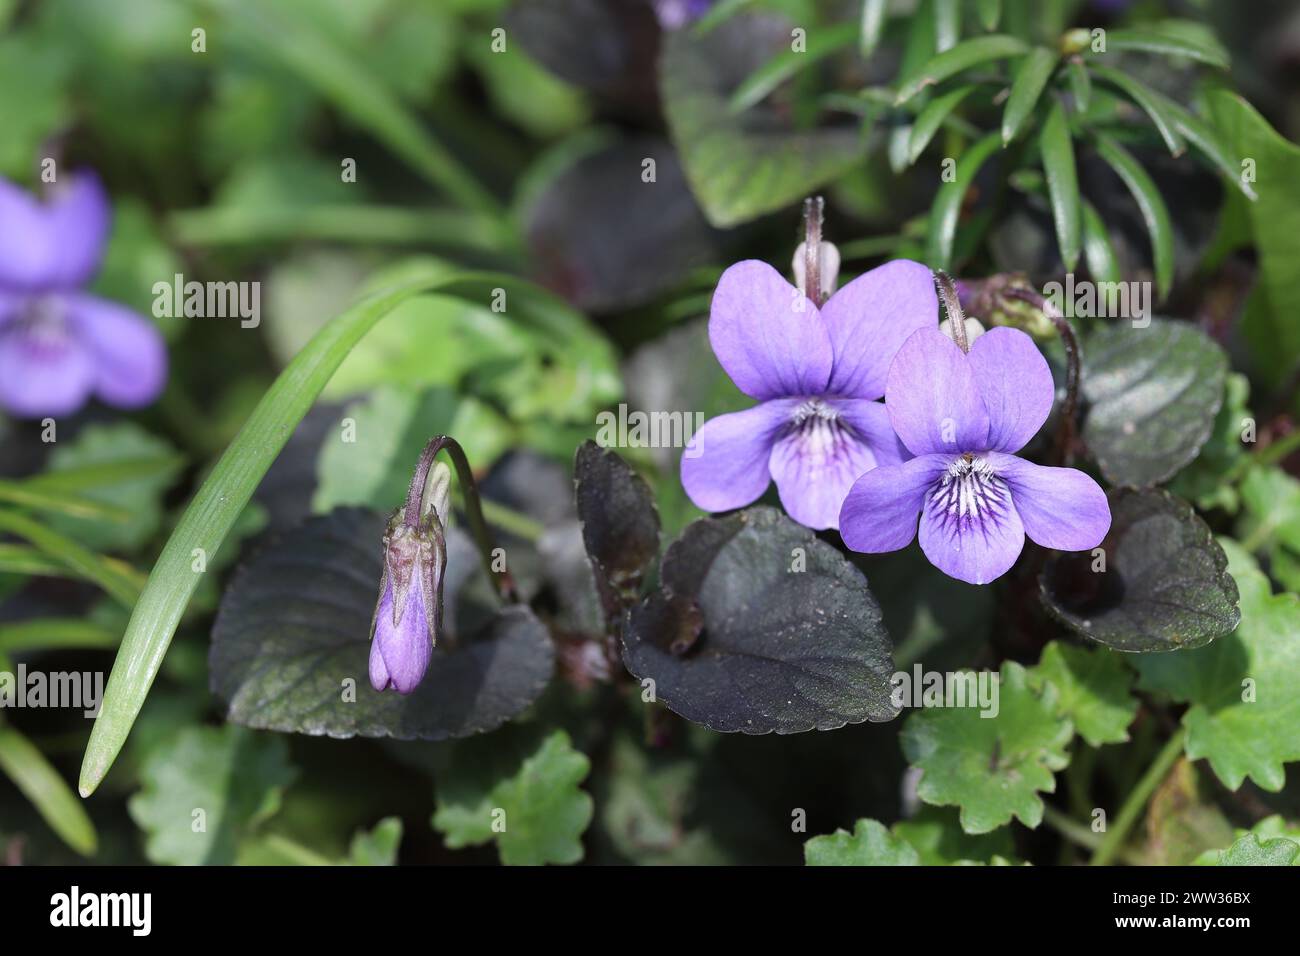 Close-up of beautiful wild growing violets, side view Stock Photo